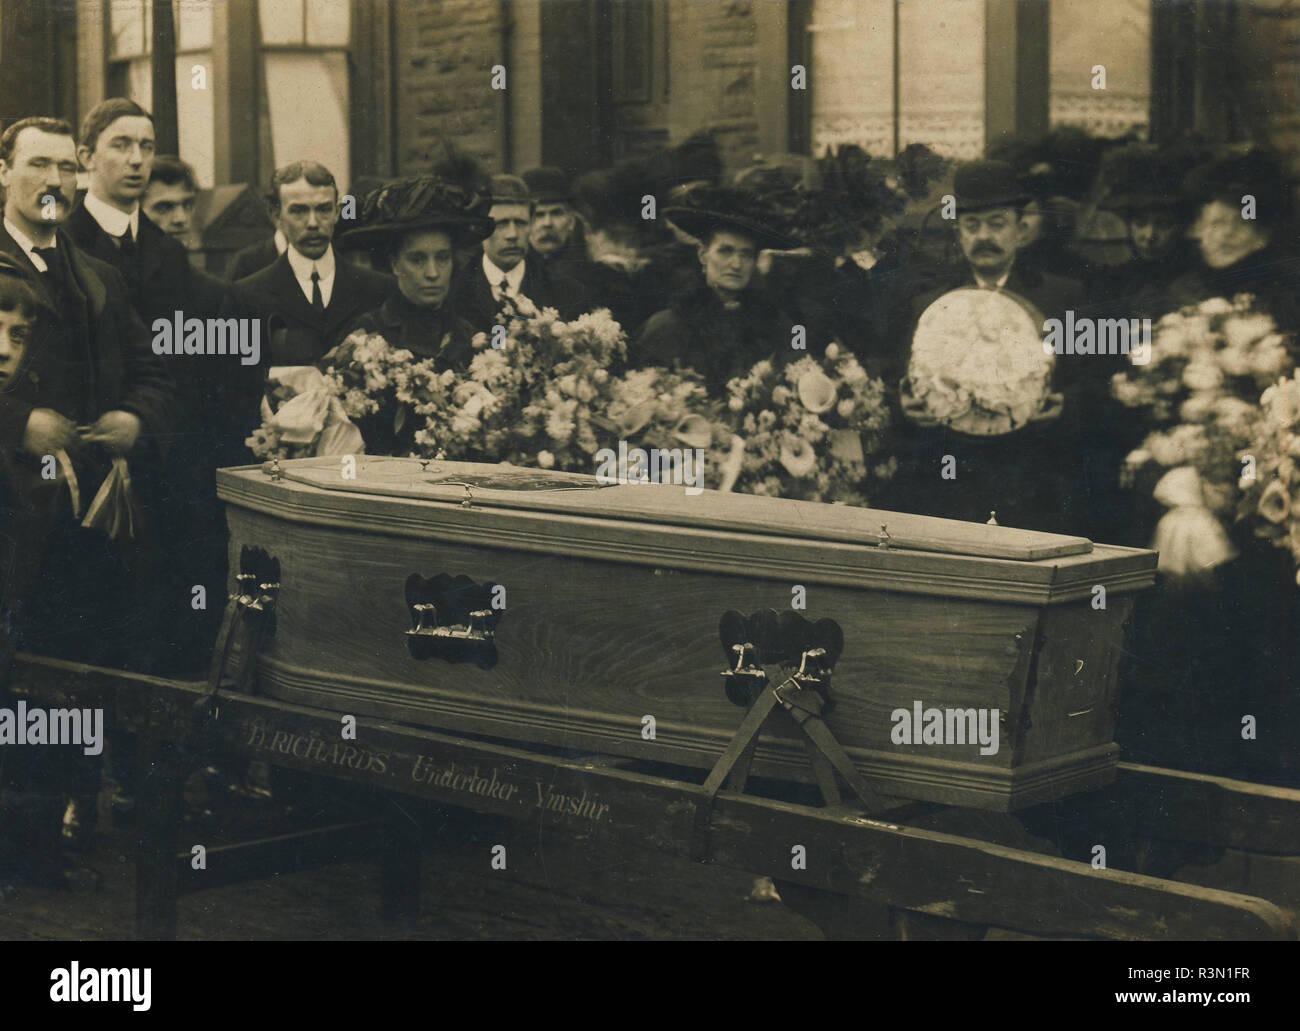 Historic Archive Image of a Welsh Funeral at Ynyshir, Rhondda Valley, Wales, c1910s Stock Photo